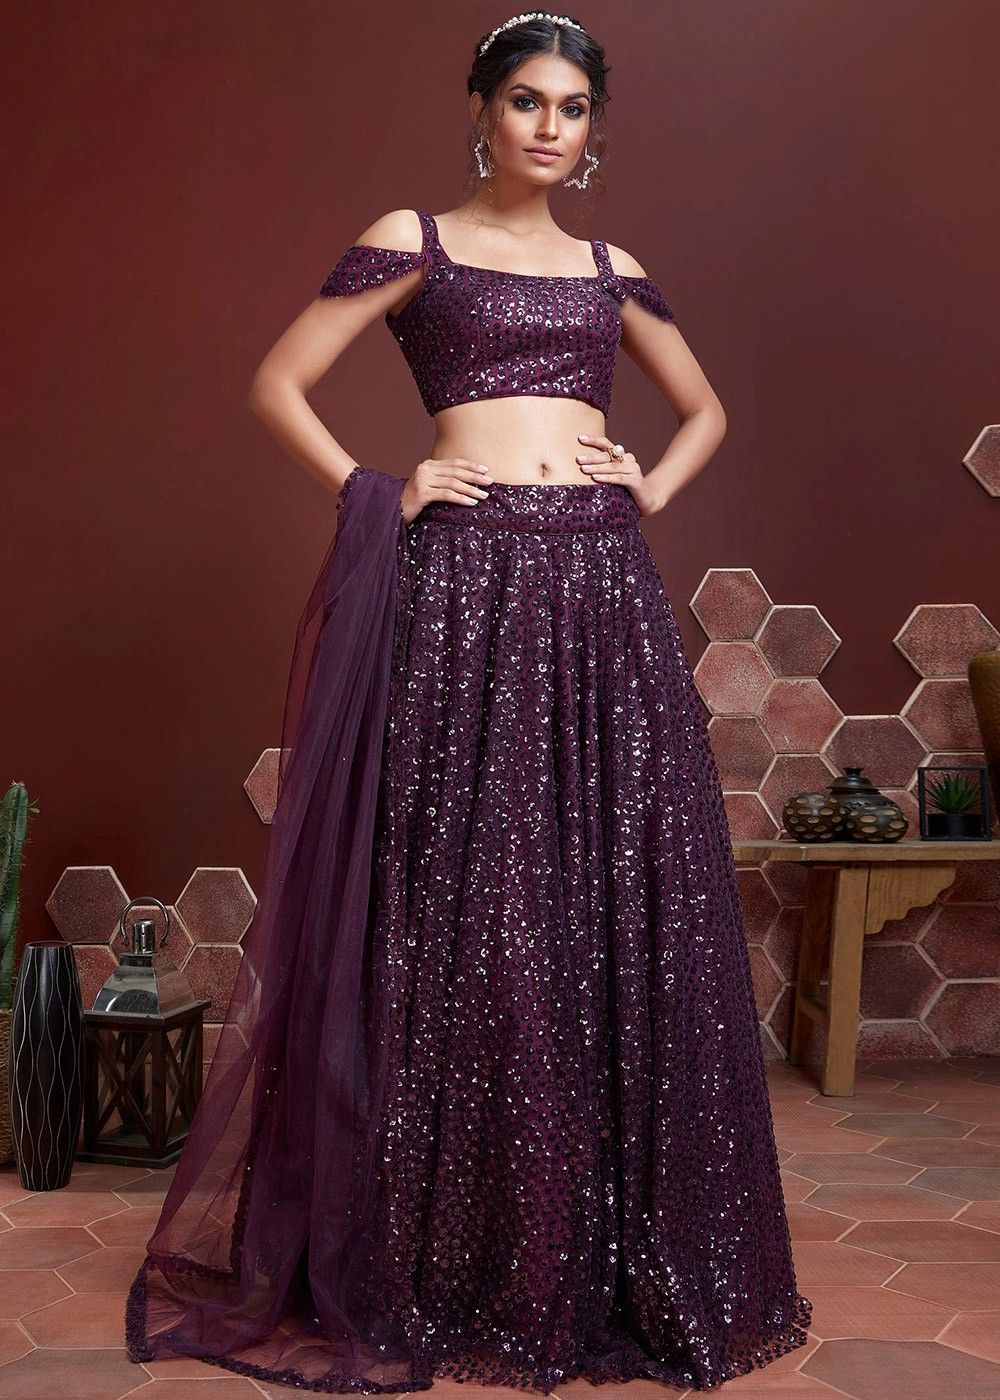 Discover more than 154 crop top lehenga for engagement super hot